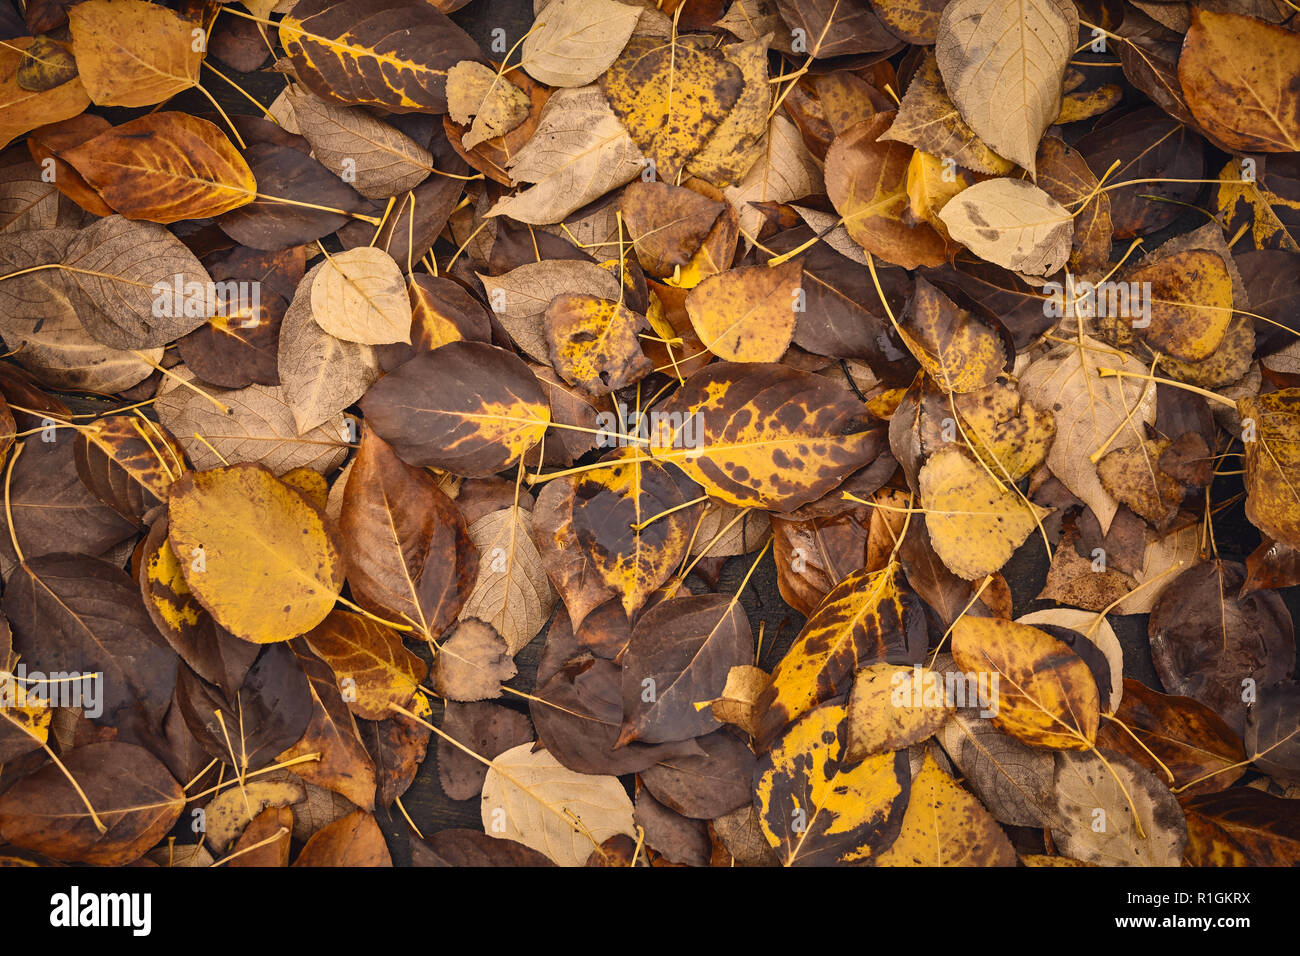 Decaying leaves, time passing concept, color toning applied. Stock Photo